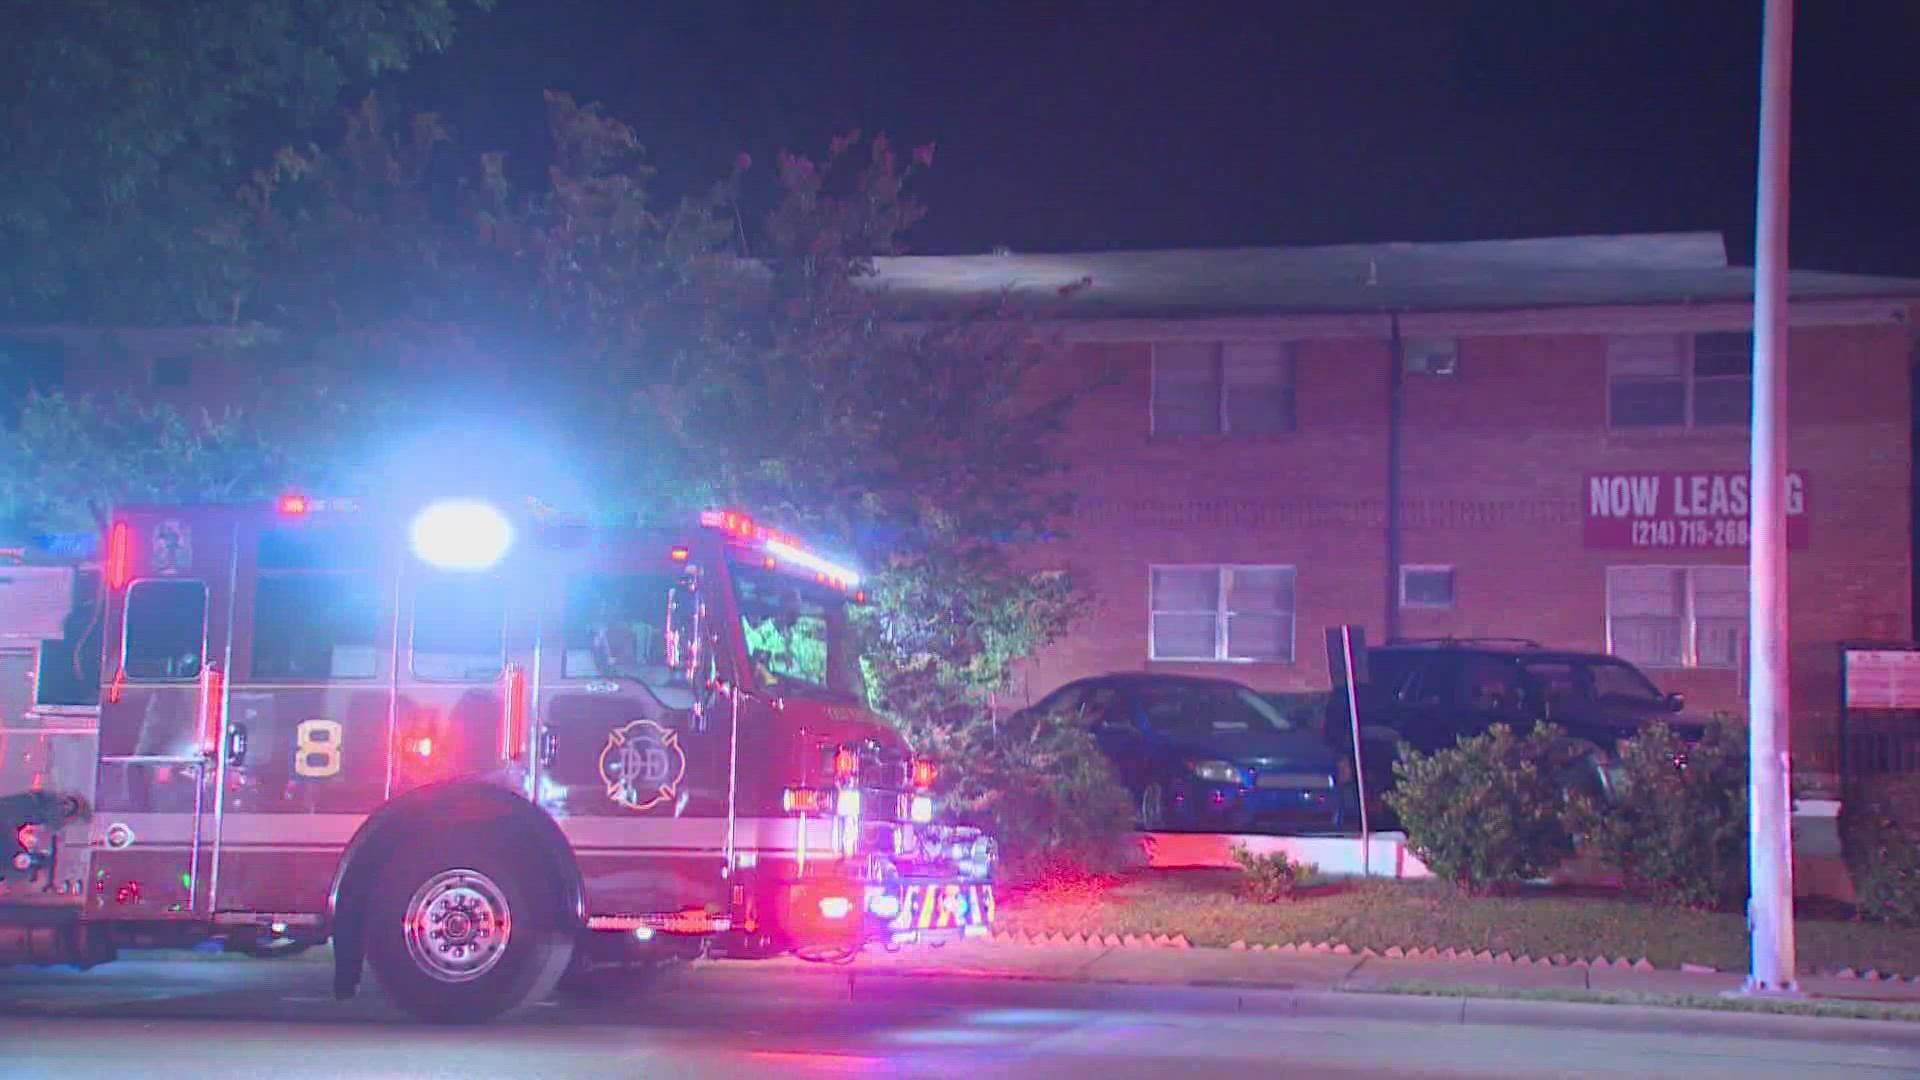 Authorities at the scene tell WFAA that one woman suffered from smoke inhalation. The American Red Cross has been called to assist residents.